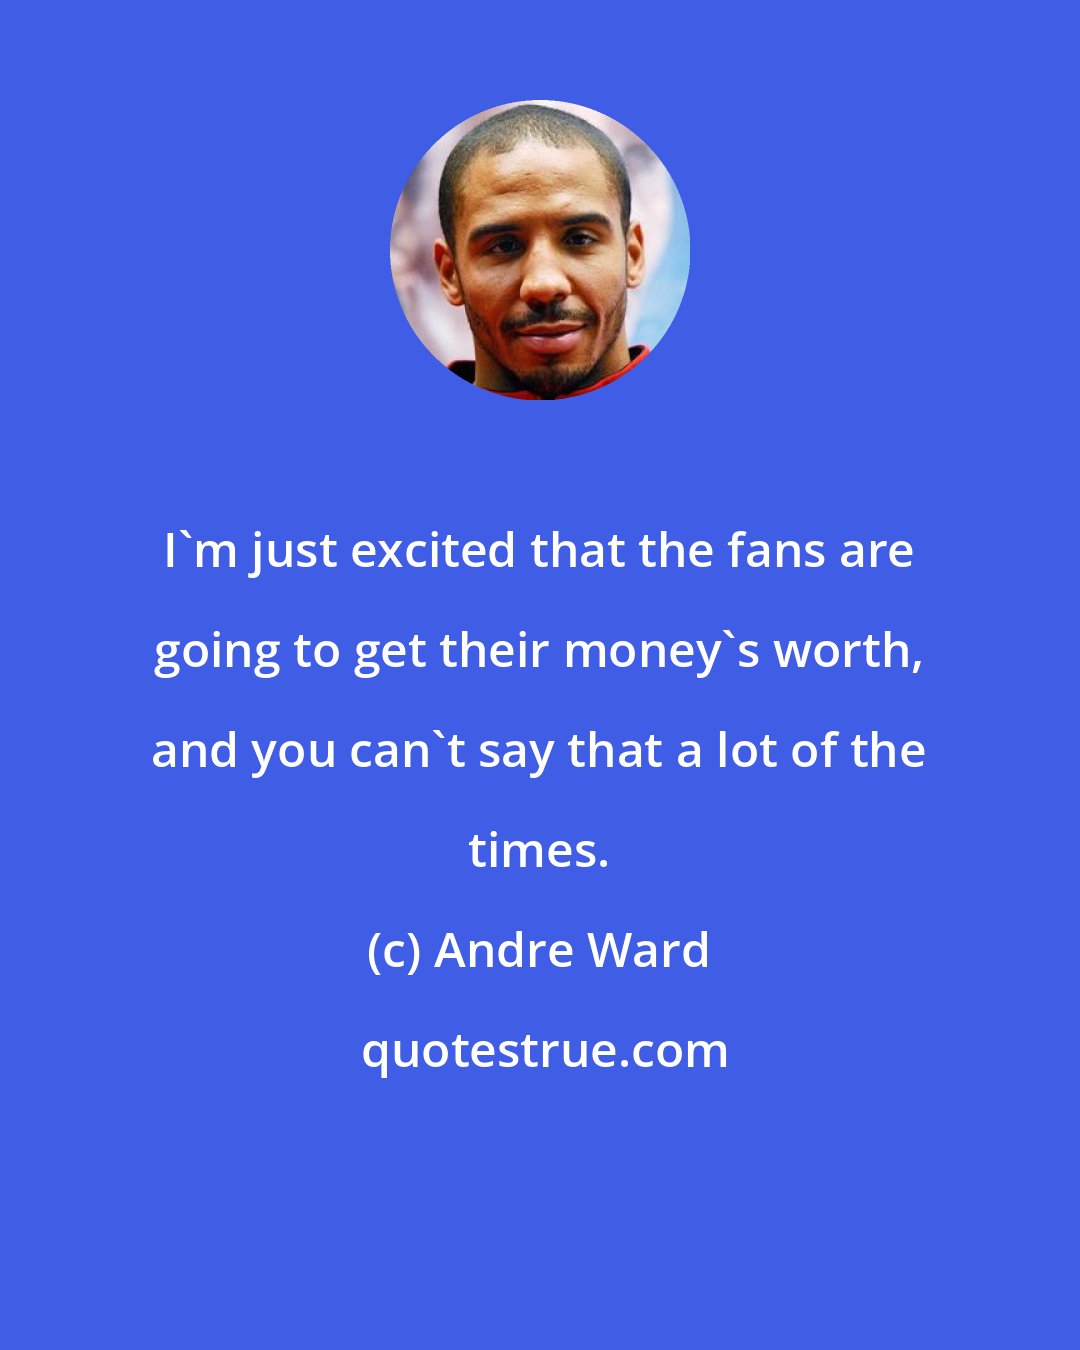 Andre Ward: I'm just excited that the fans are going to get their money's worth, and you can't say that a lot of the times.